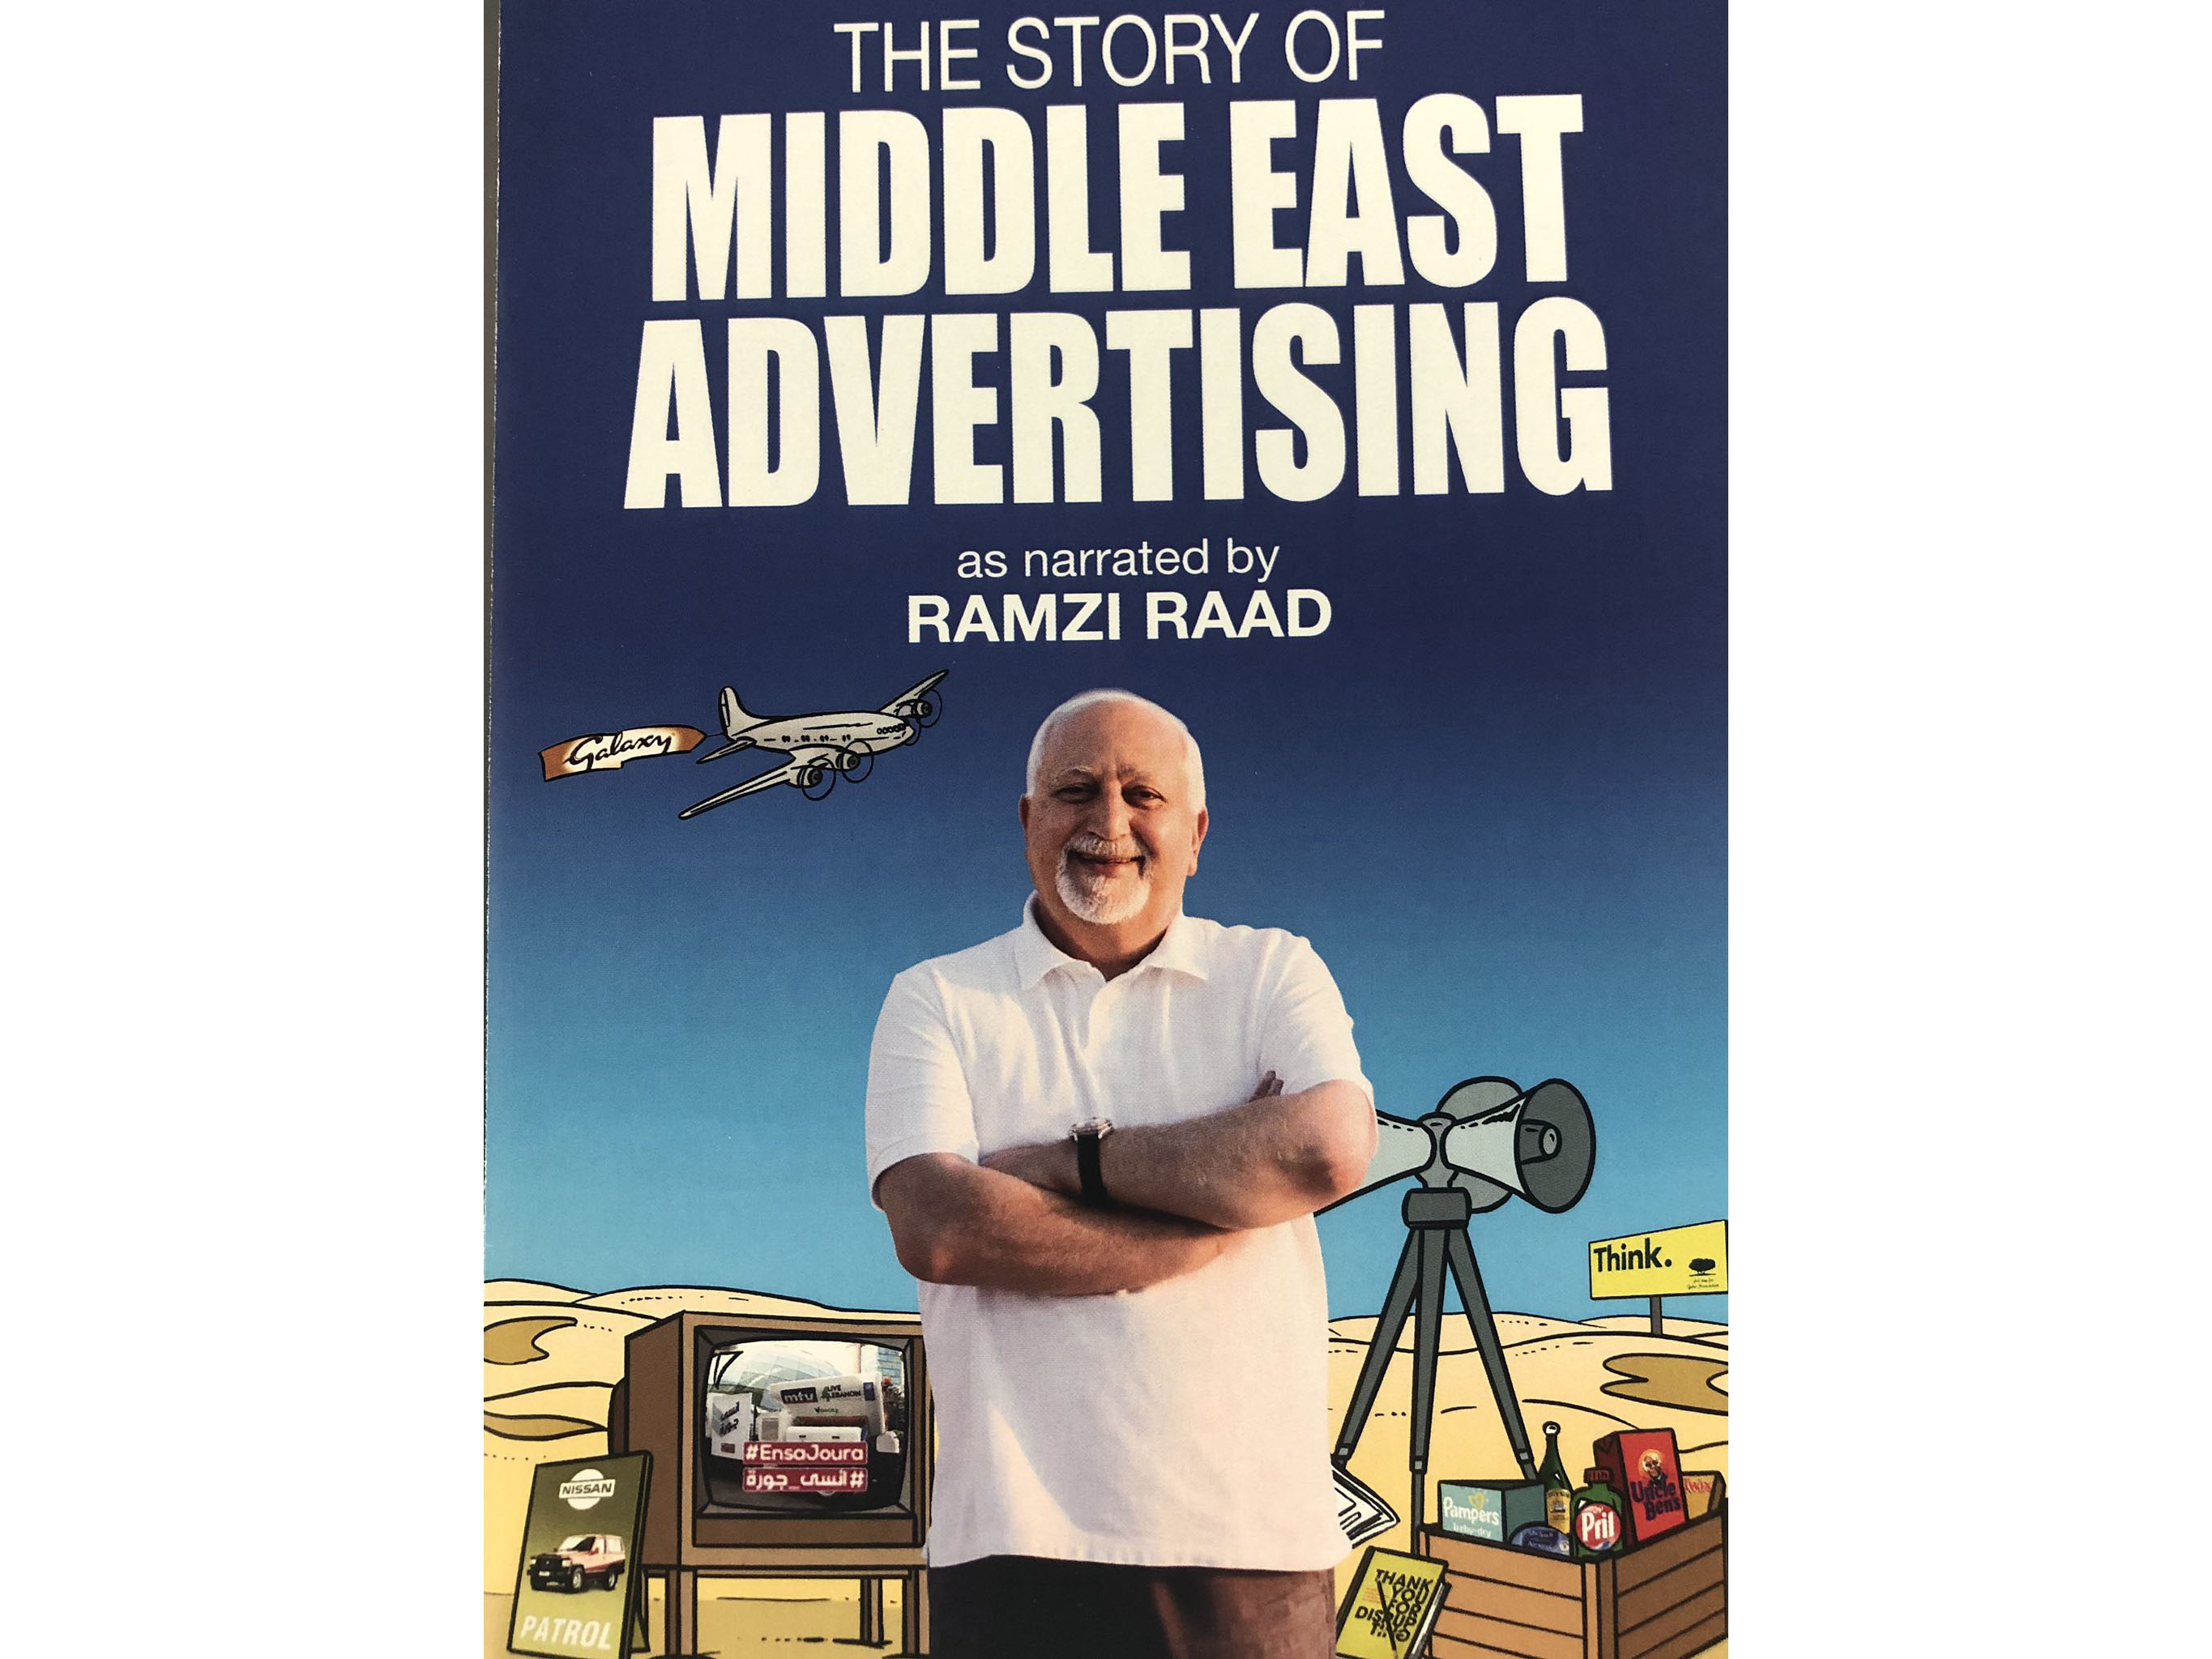 Ramzi Raad on the challenges and triumphs of building a successful advertising industry in MENA